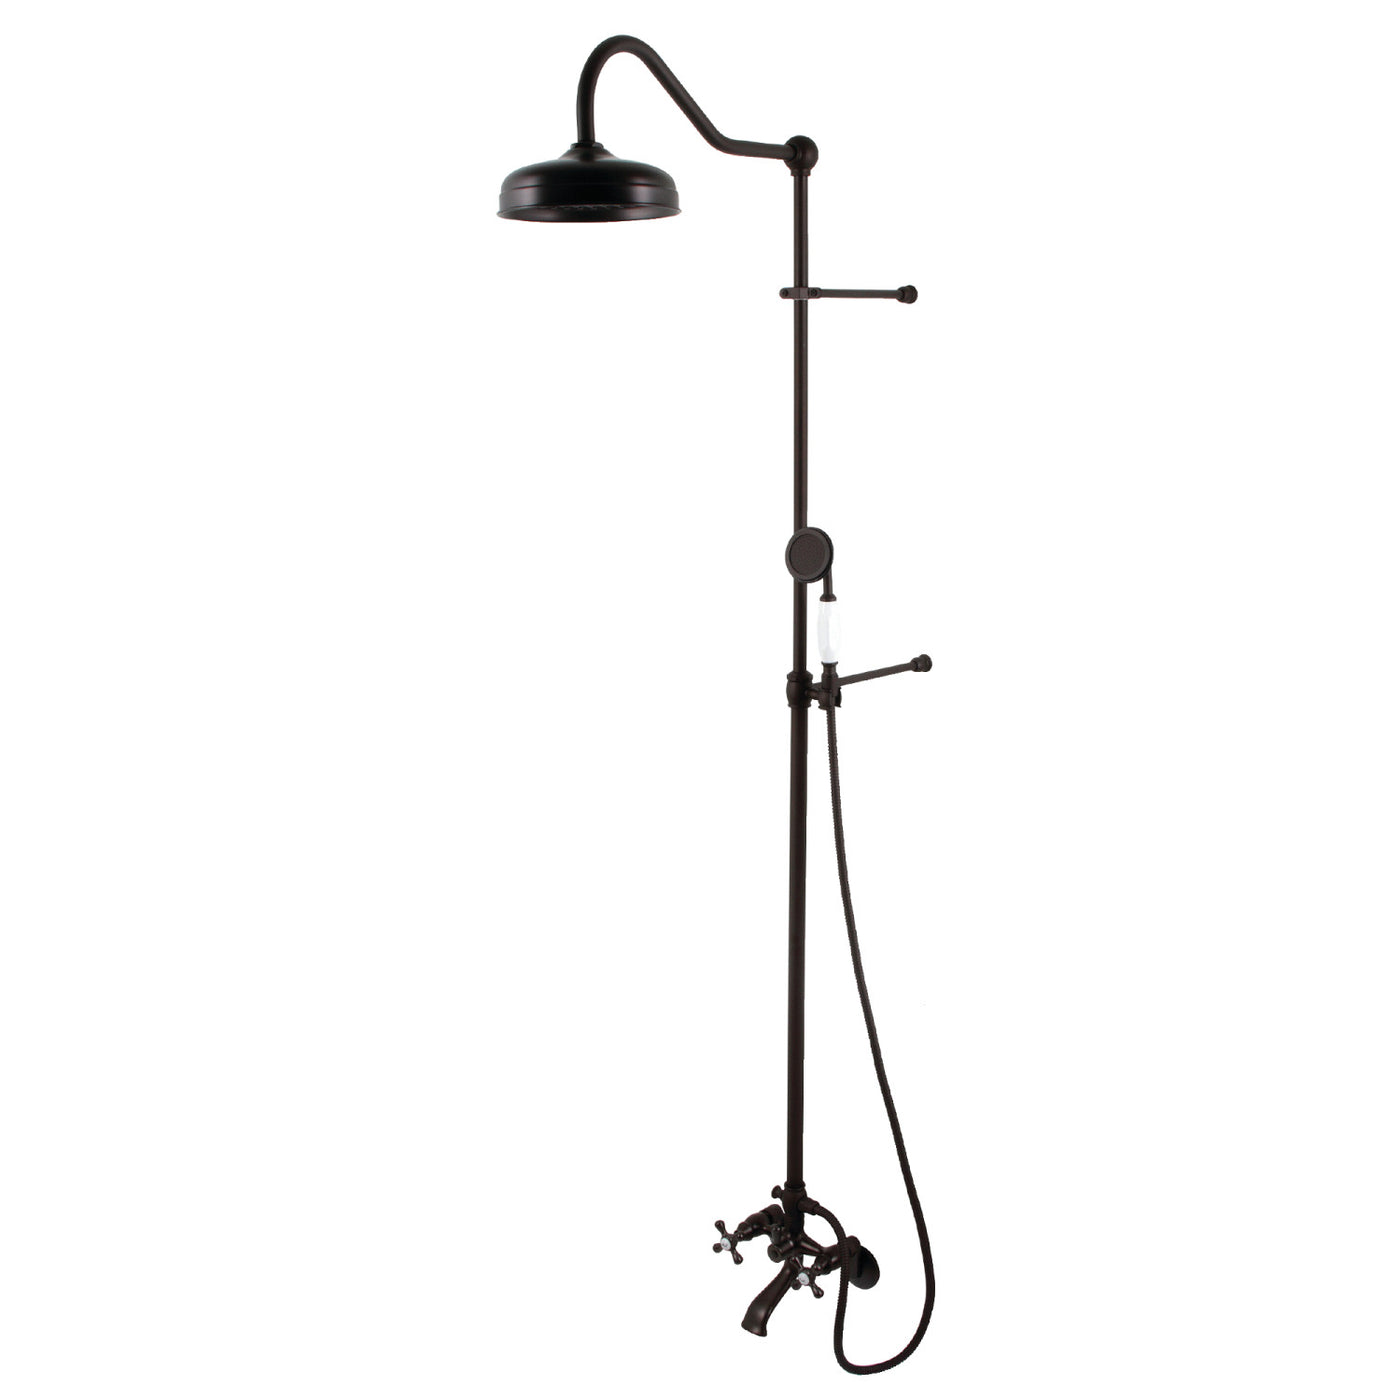 Elements of Design EDK2665 Clawfoot Tub Faucet Package with Shower Combo, Oil Rubbed Bronze